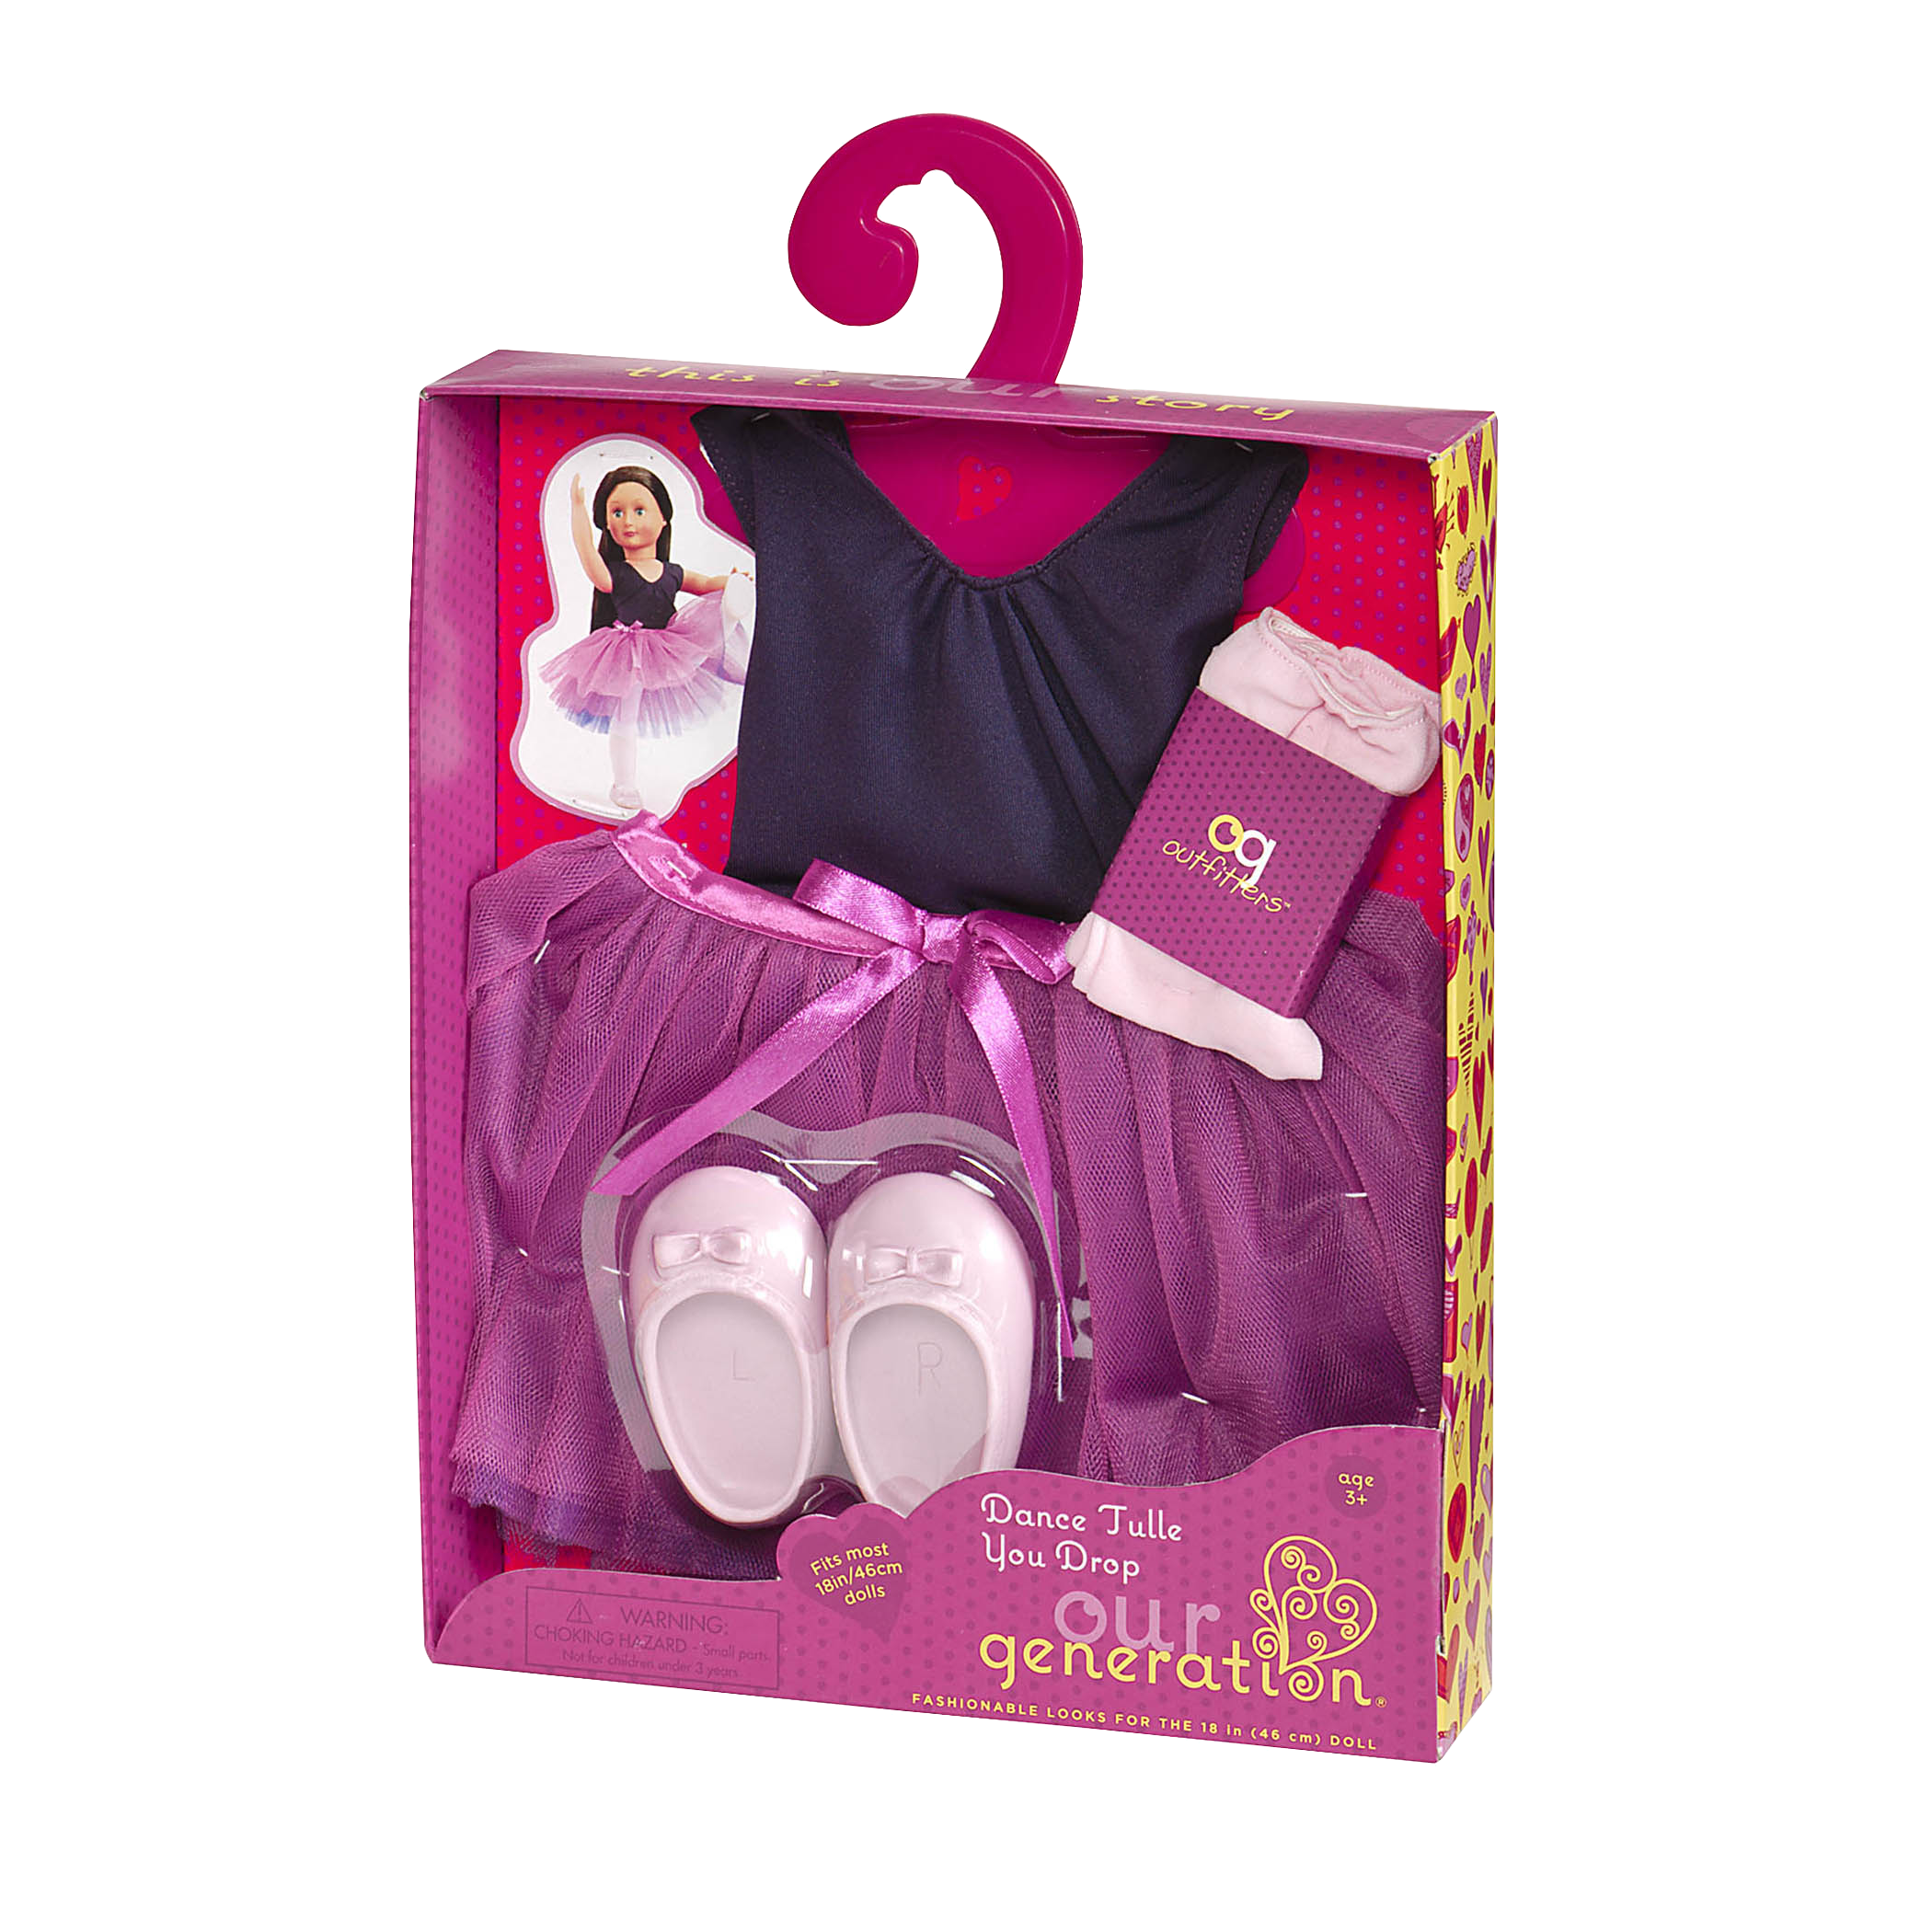 Dance Tulle You Drop ballet outfit package